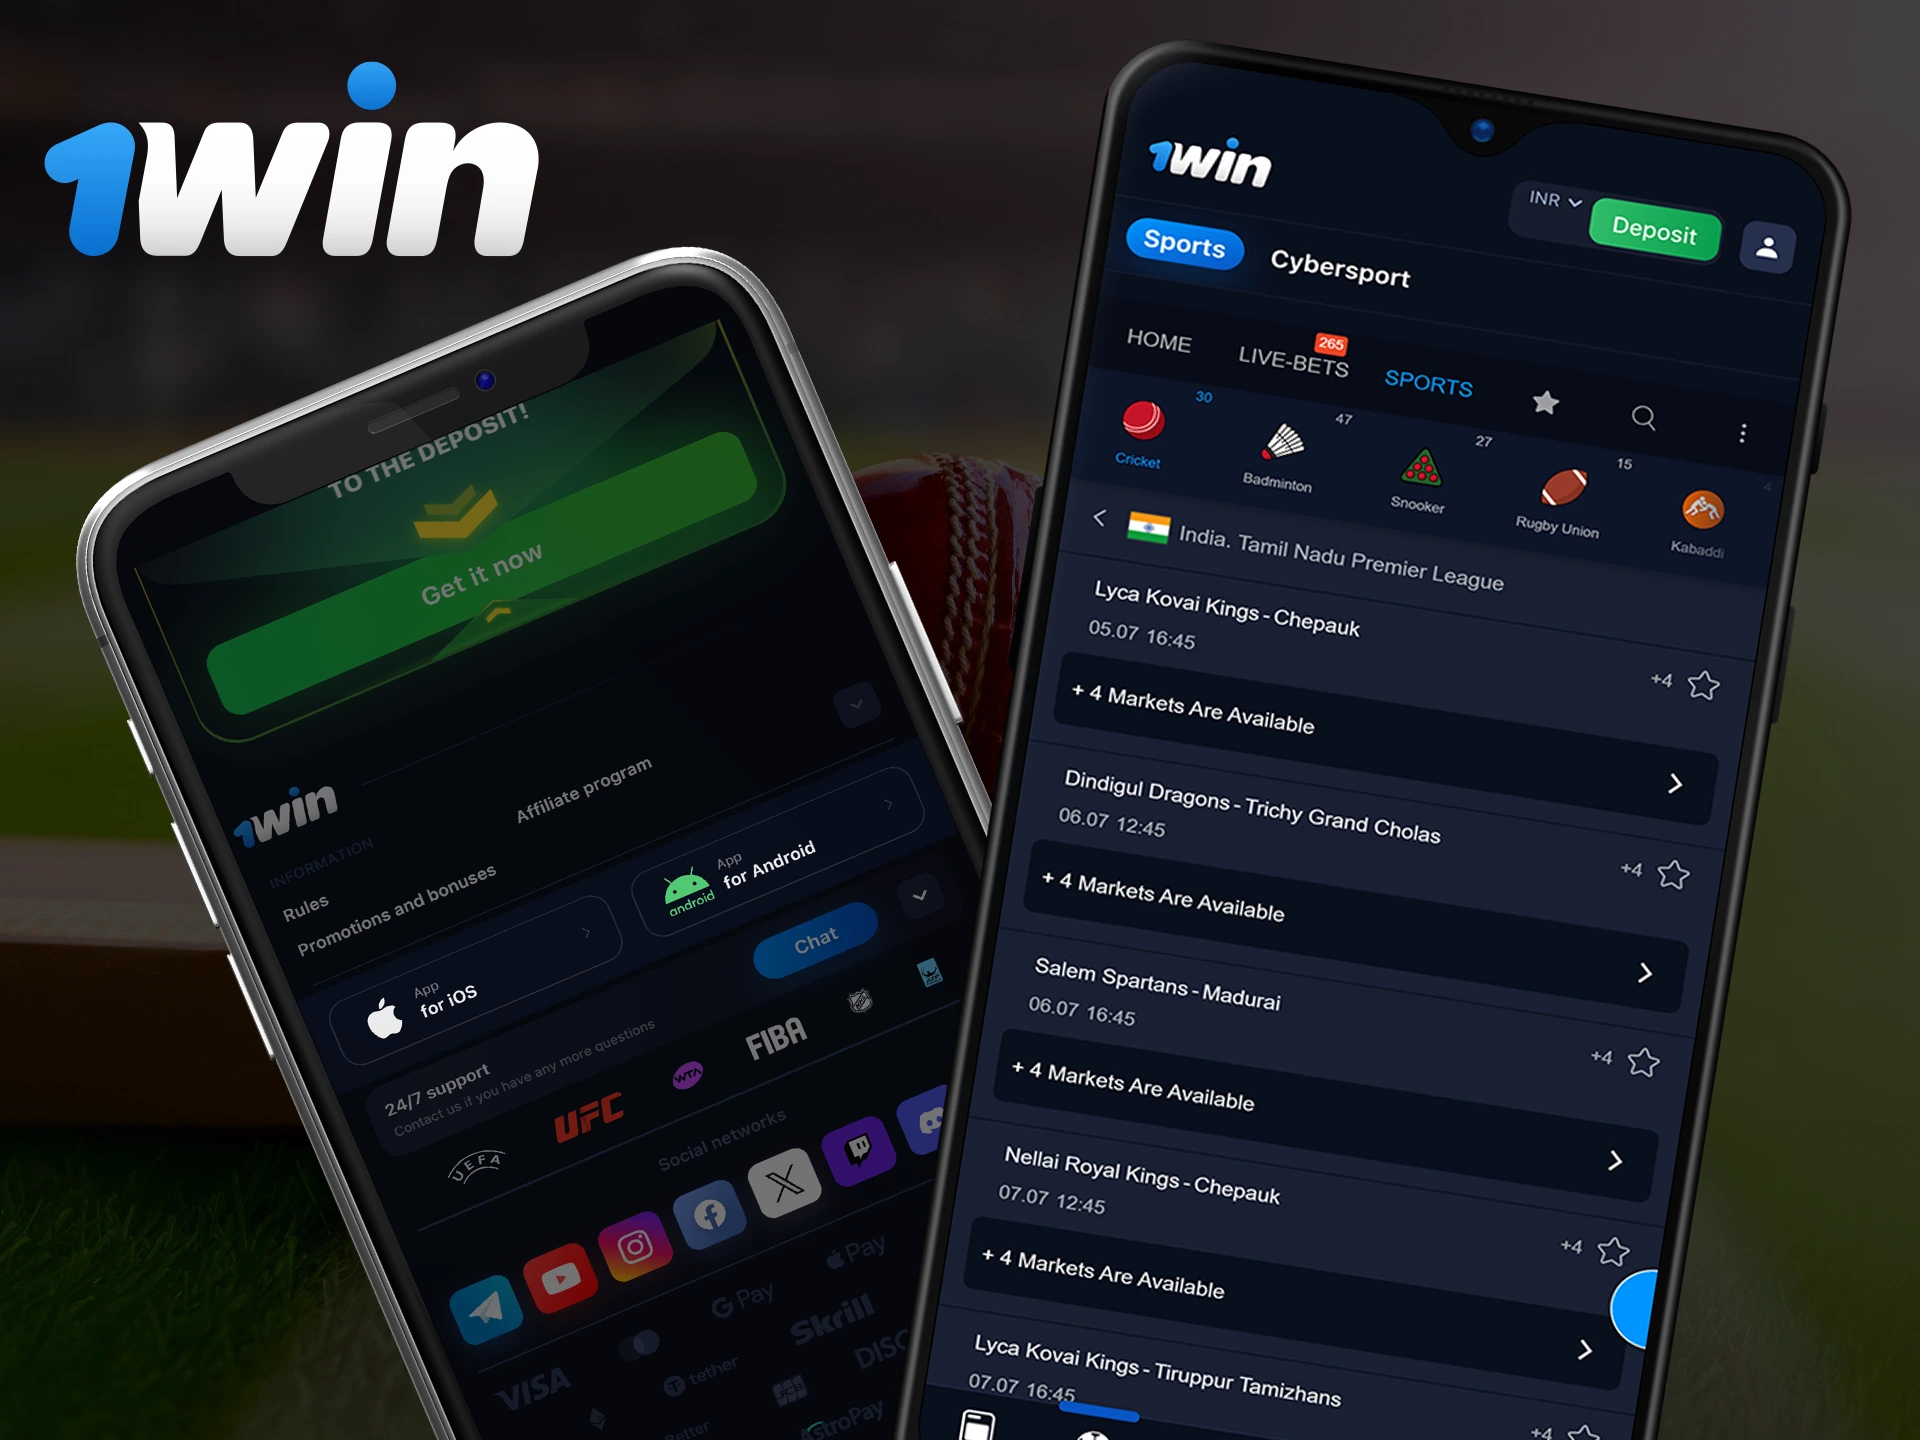 Bet on cricket quickly and easily via the 1Win mobile app.